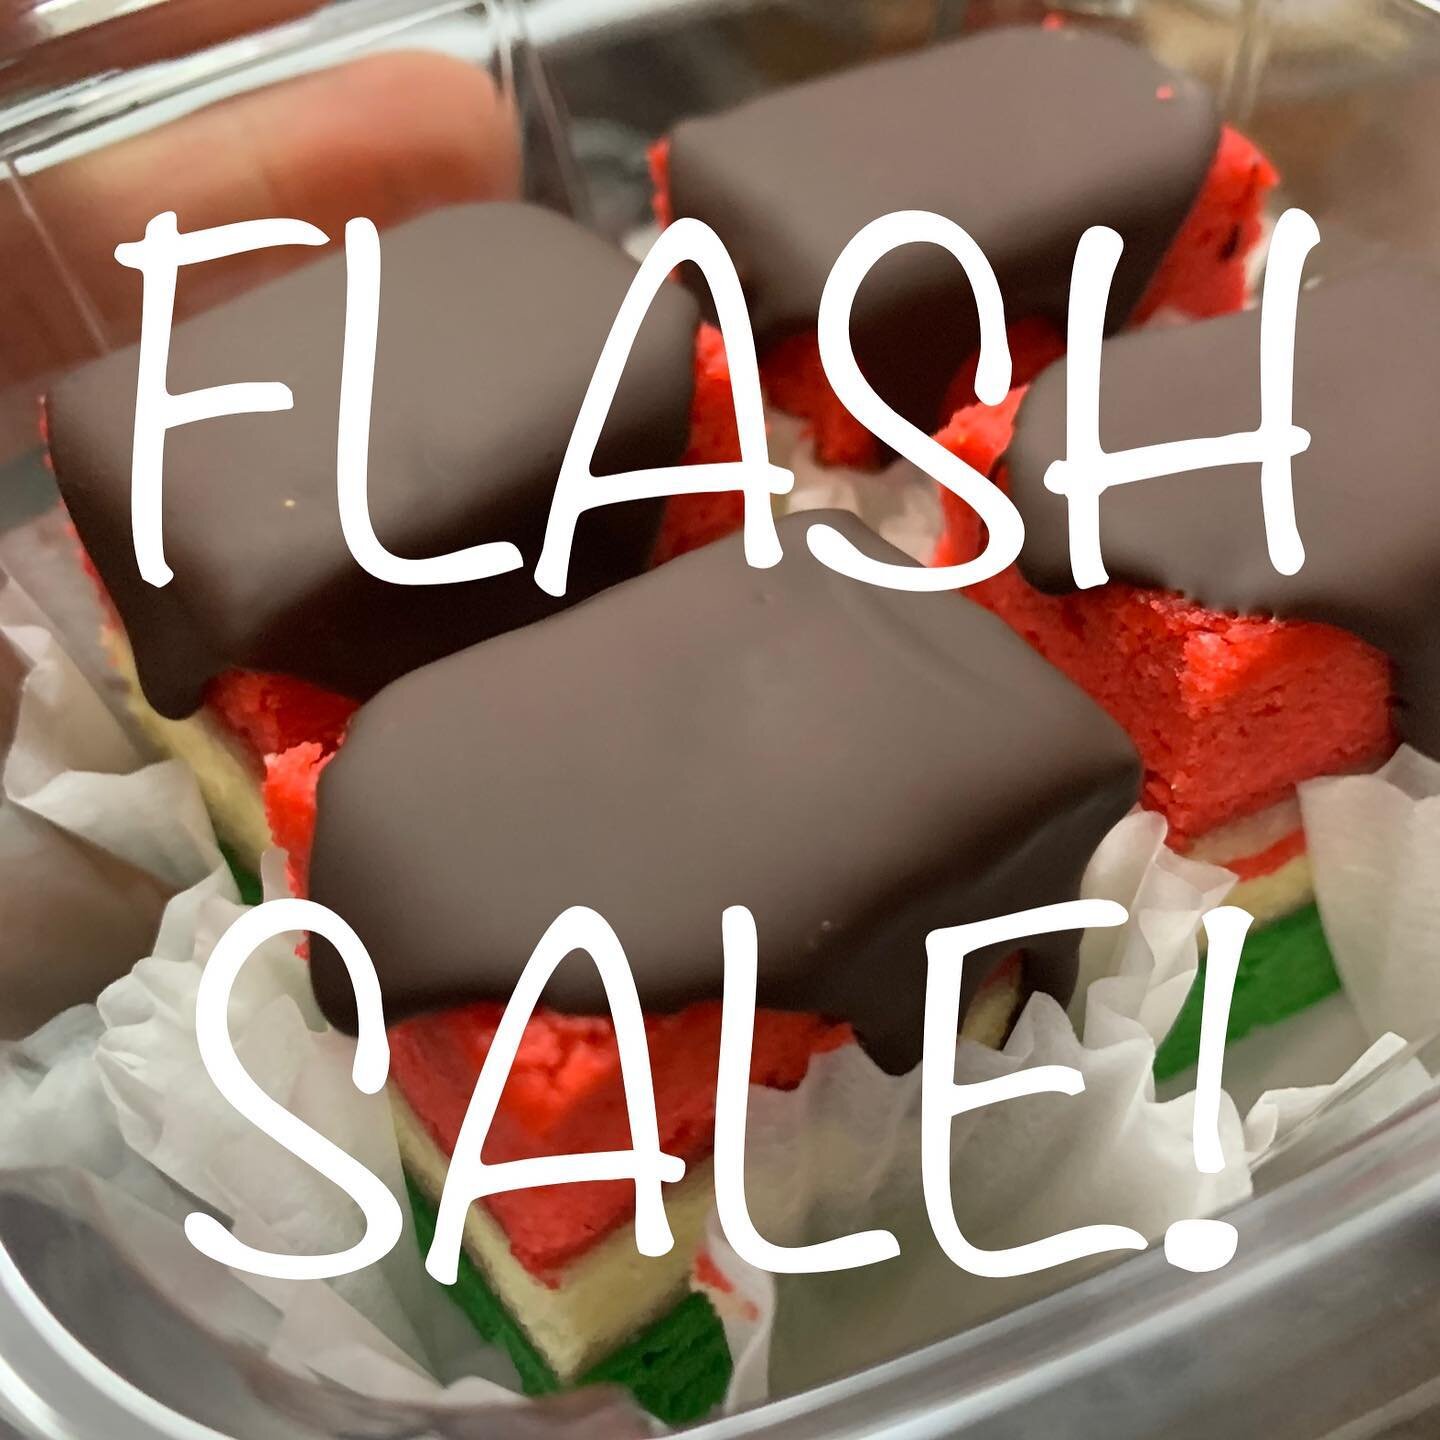 Angie's Rainbow Cookies is having a flash sale today! (My babysitter never showed up so I had to cancel The Dublin Market 😭)

Please help me out!! Share this post too! 

I have:
Traditional Rainbow Cookies (box of 4)- $10
Gluten Free Traditional Rai